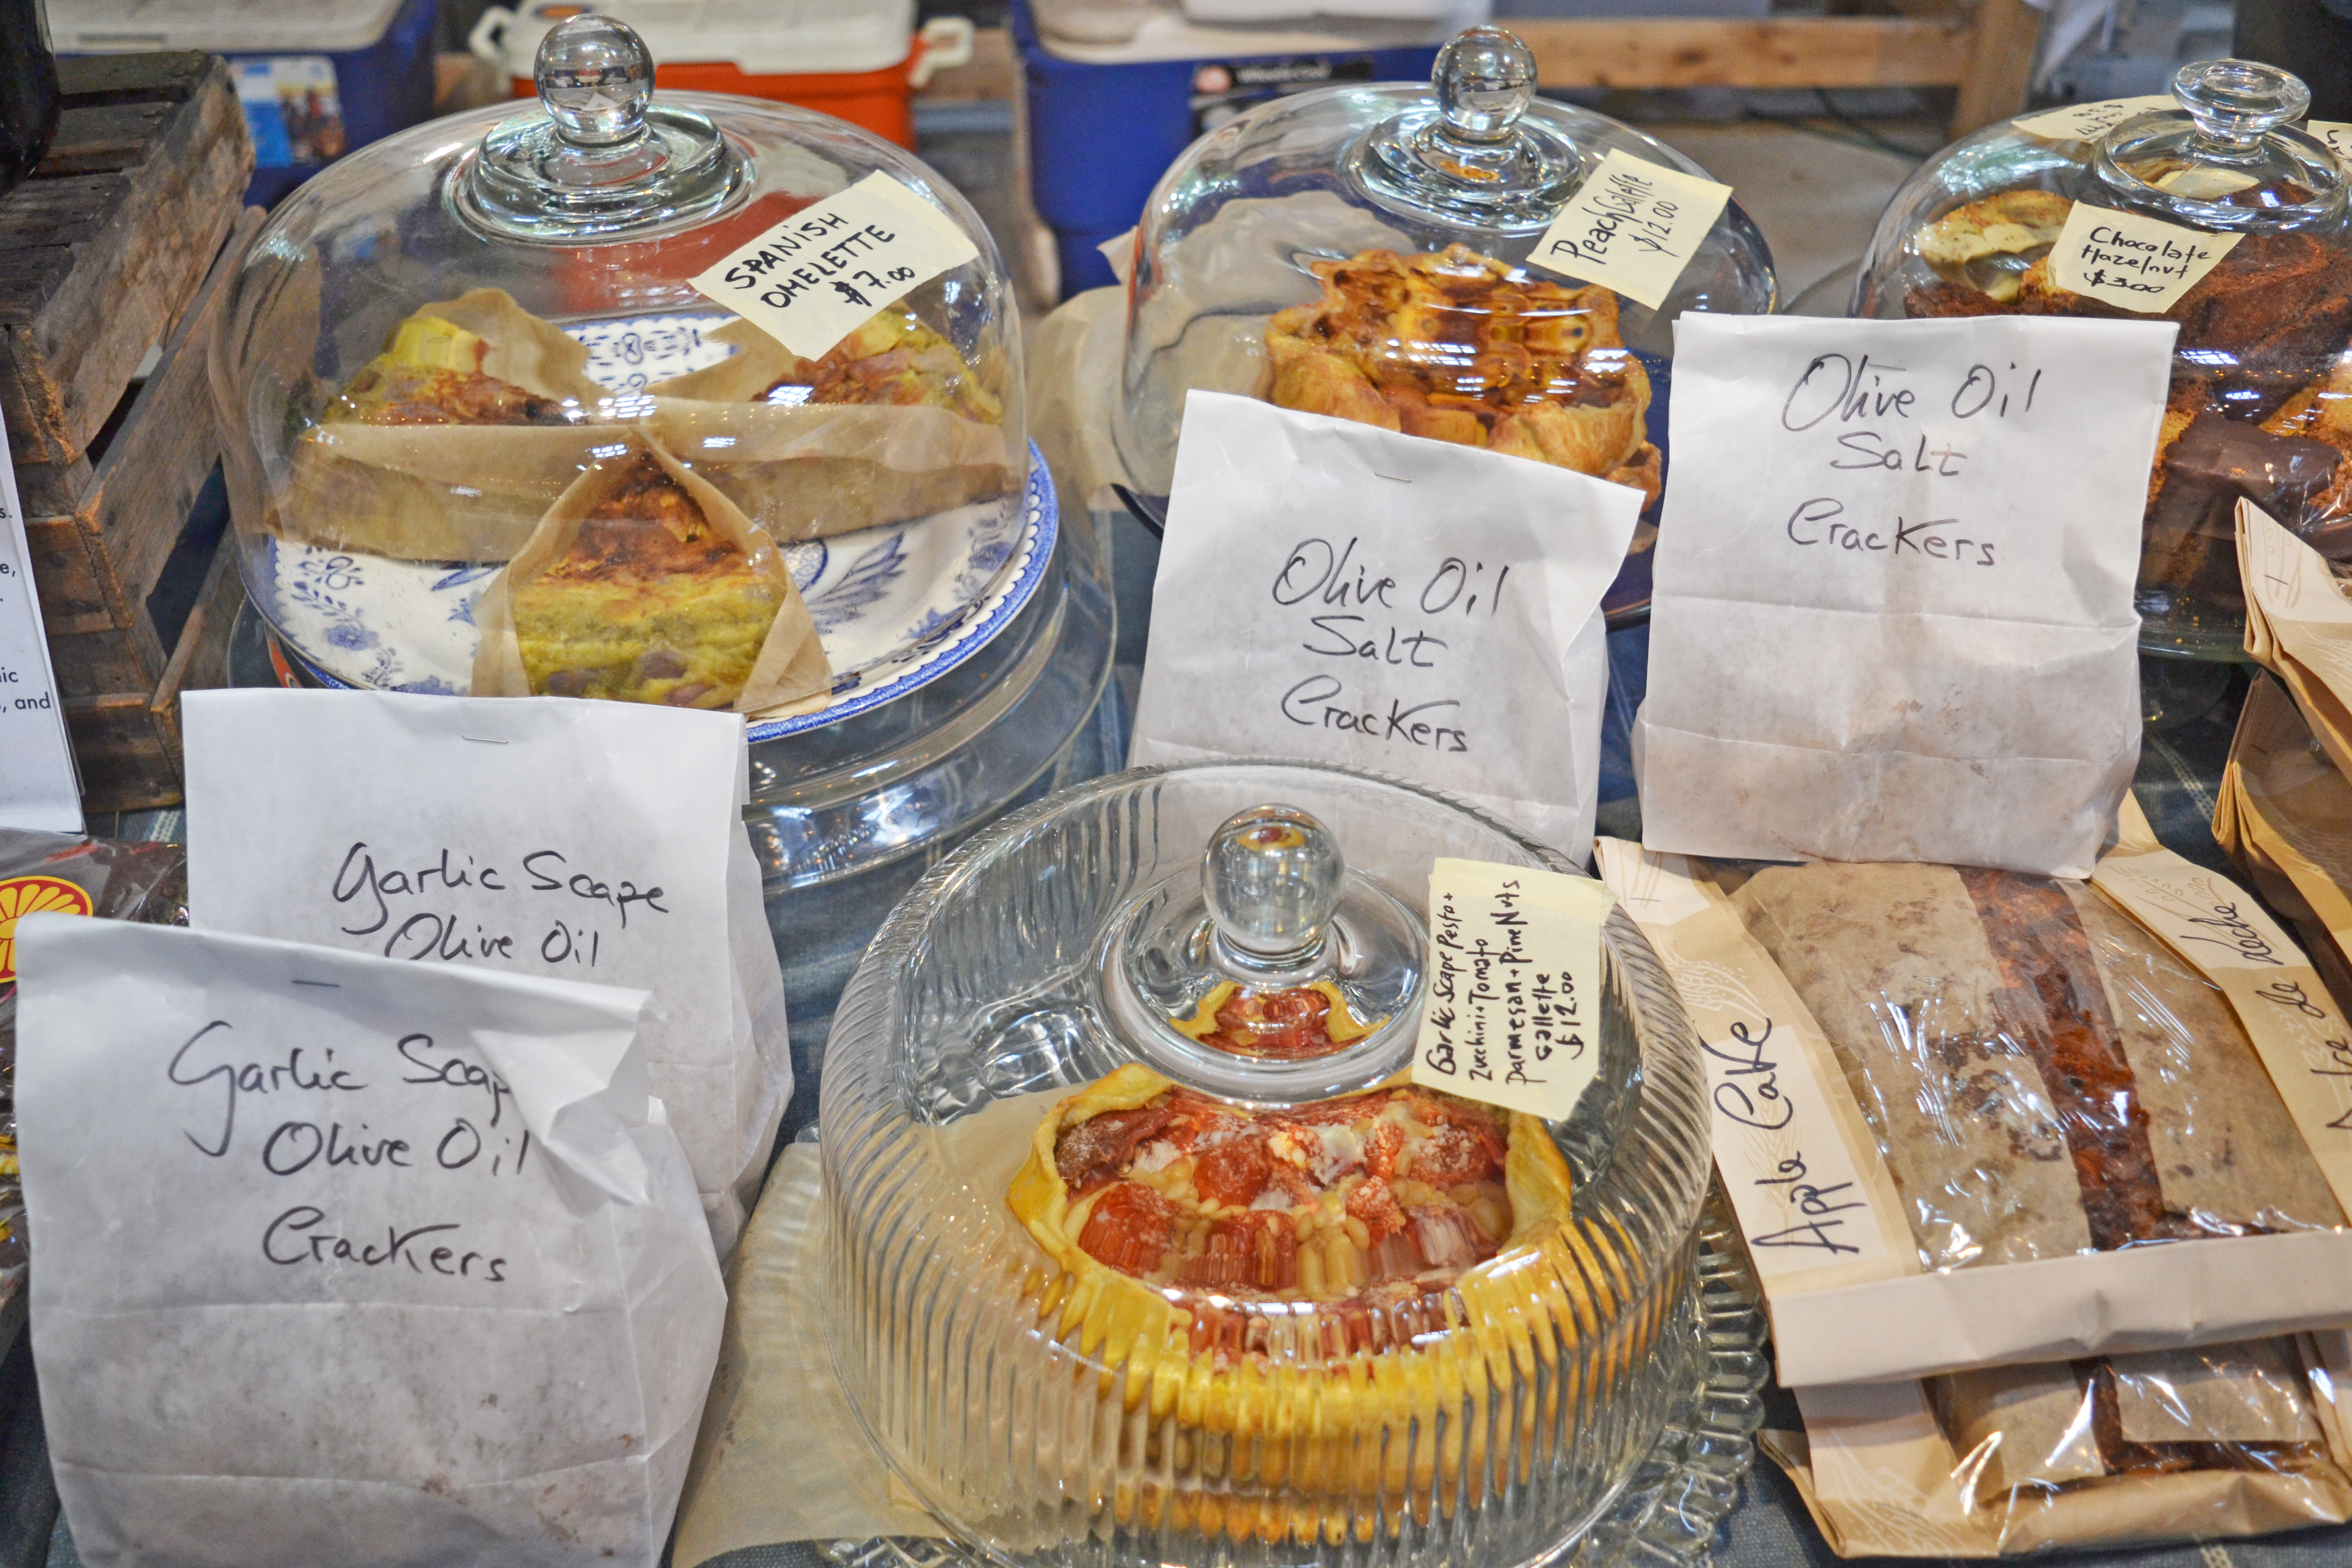 Pick up local produce and artisan products at the Cooperstown Farmers Market.